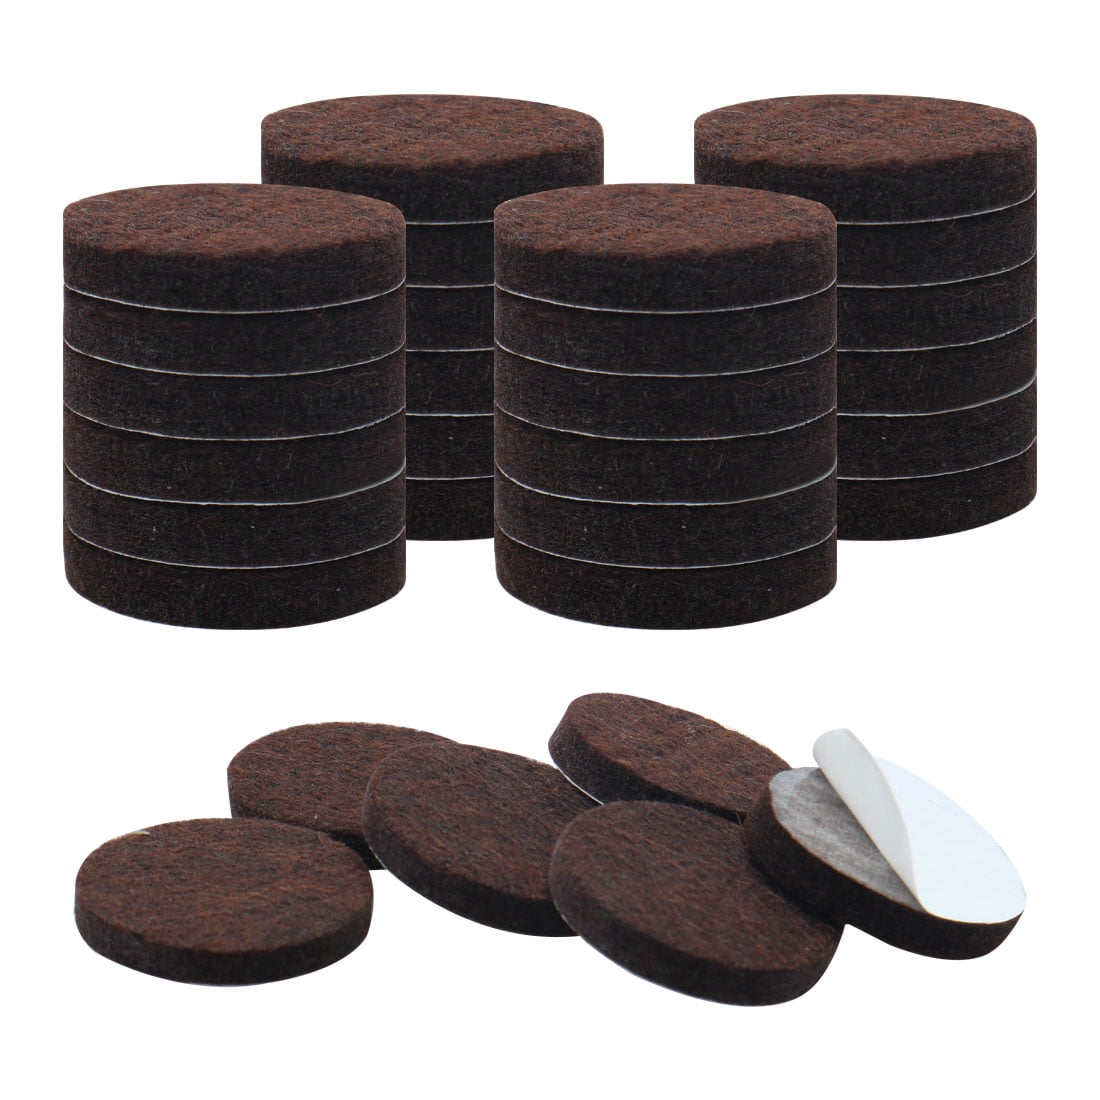 Round Furniture Felt Pads Chair Floor Protectors 5mm Thick Size:19mm 25mm 38mm 